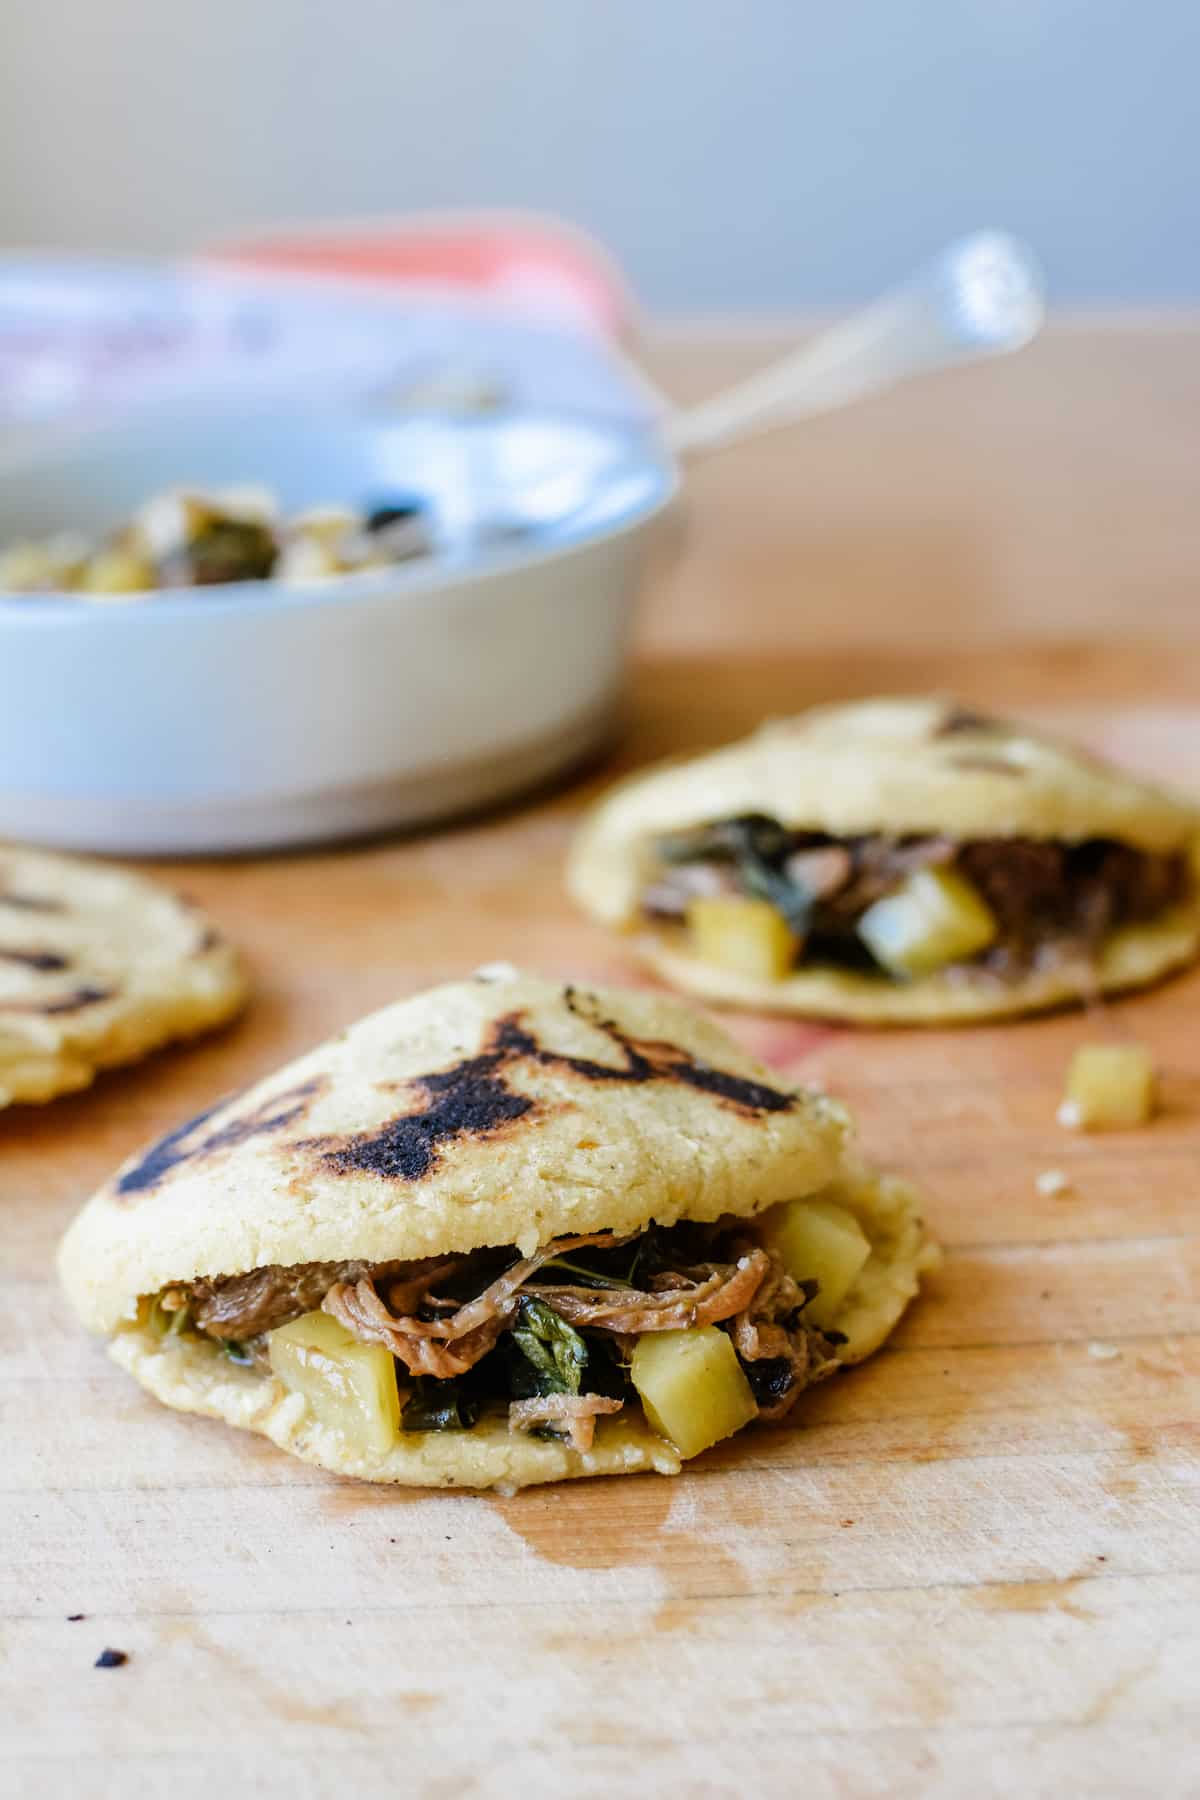 This delicious, gluten-free, dairy-free recipe for sweet potato and bacon gorditas can be stuffed with anything from braised beef to scrambled eggs! Flavored with roasted, mashed sweet potato and bits of crisp bacon, these are the most divine gorditas ever. Step-by-step instructions included! #gorditas #gorditarecipe #mexicanrecipe #mexicanfood